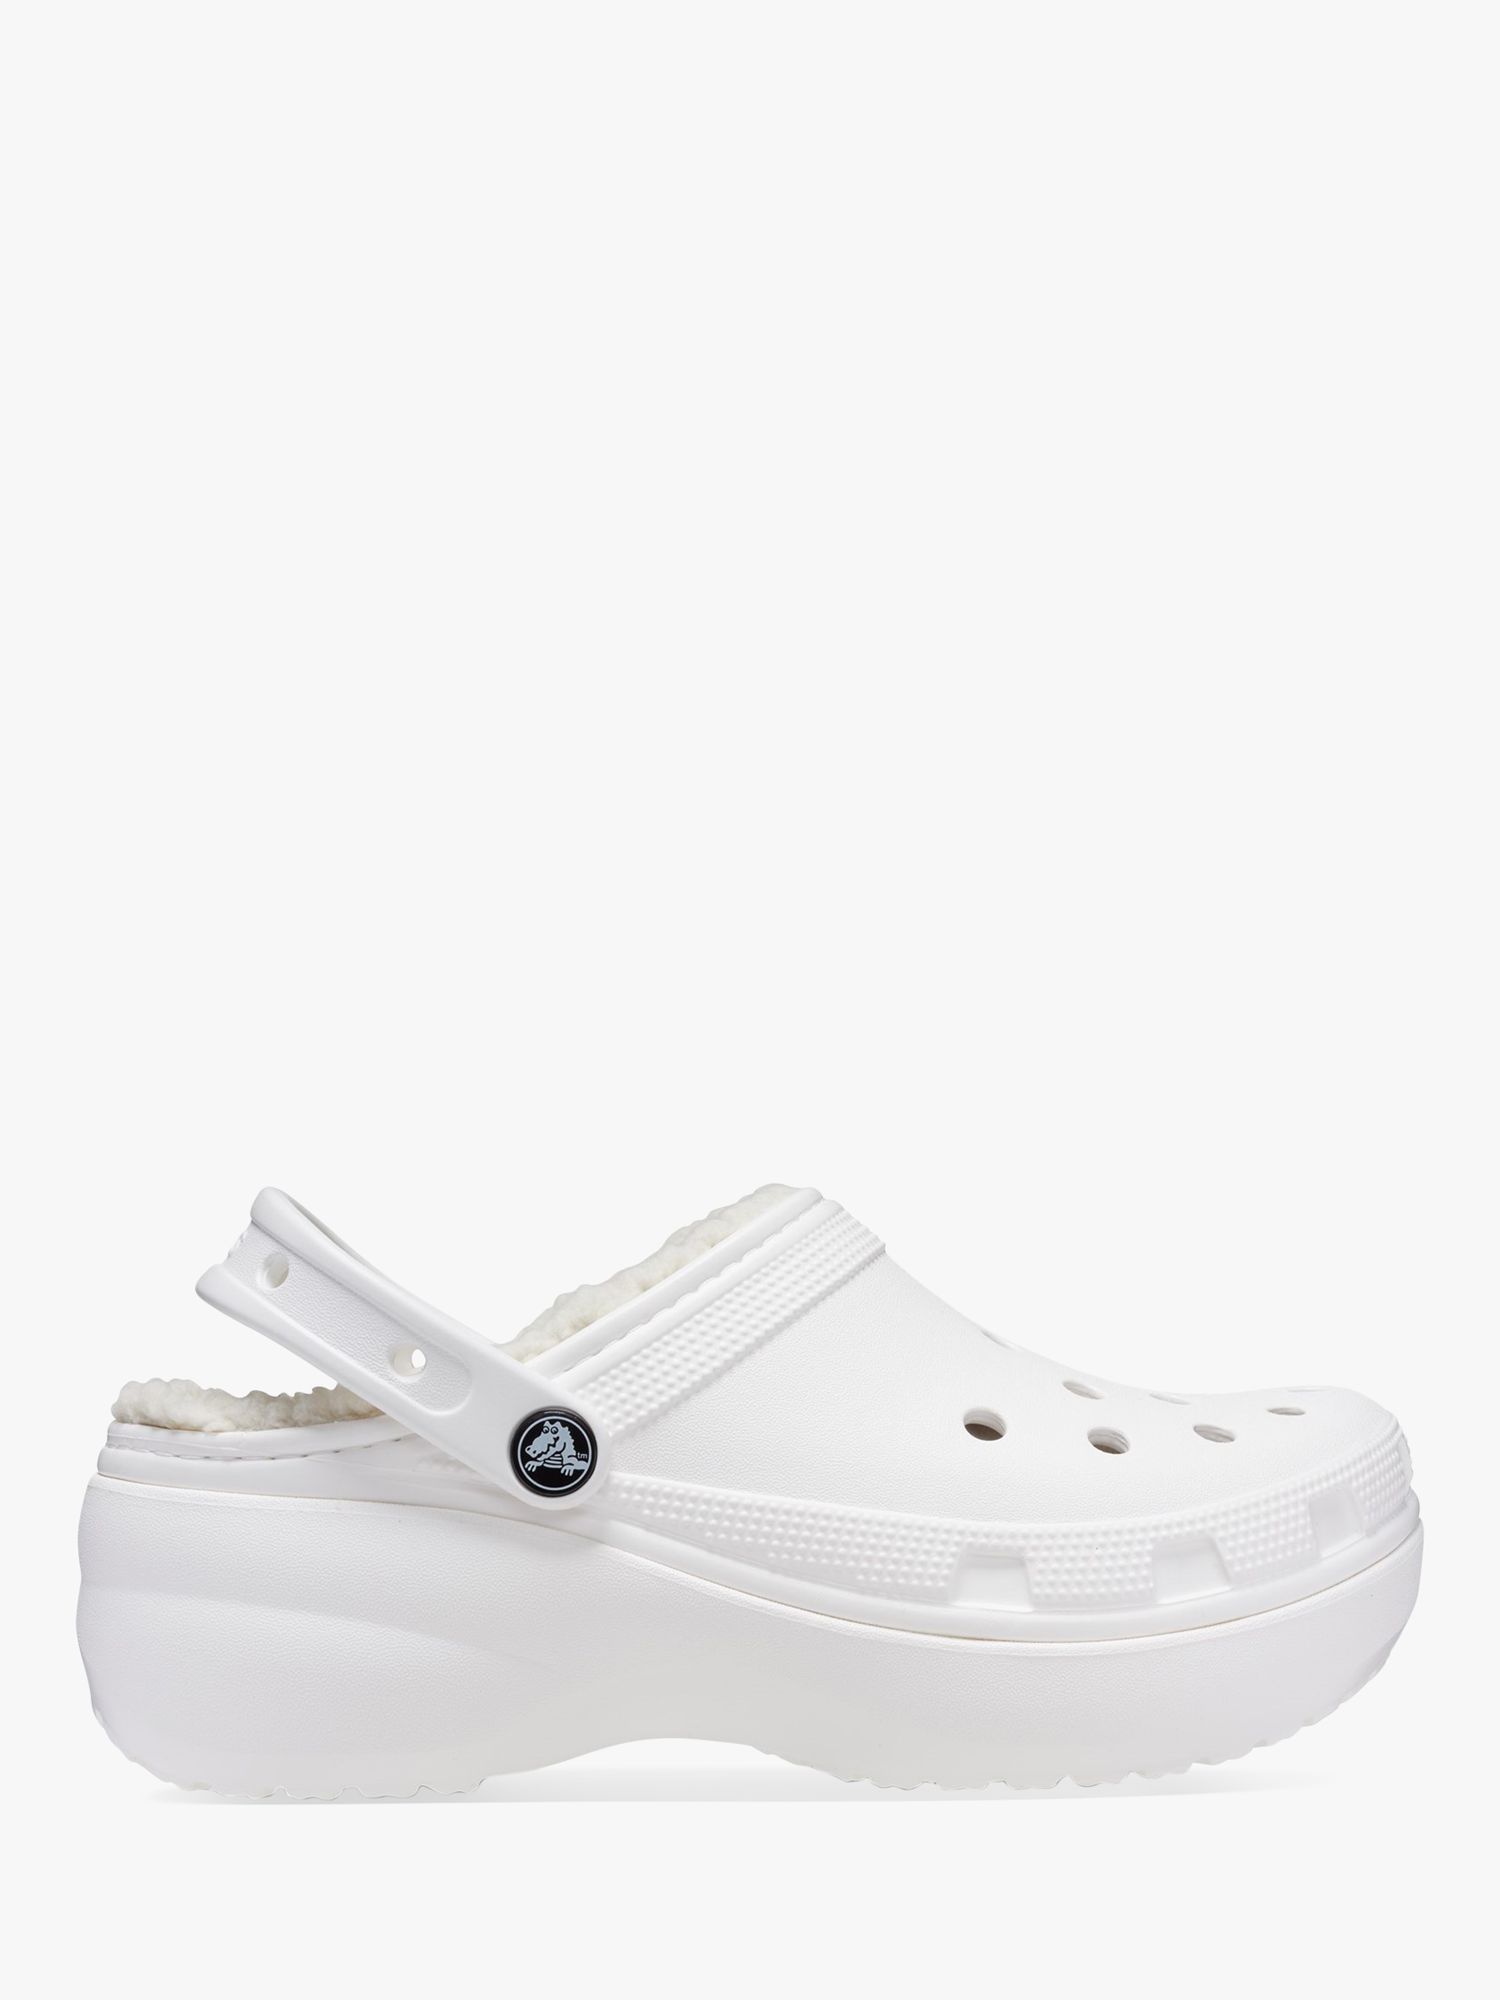 Crocs Classic Platform Lined Clog Slippers, White at John Lewis & Partners